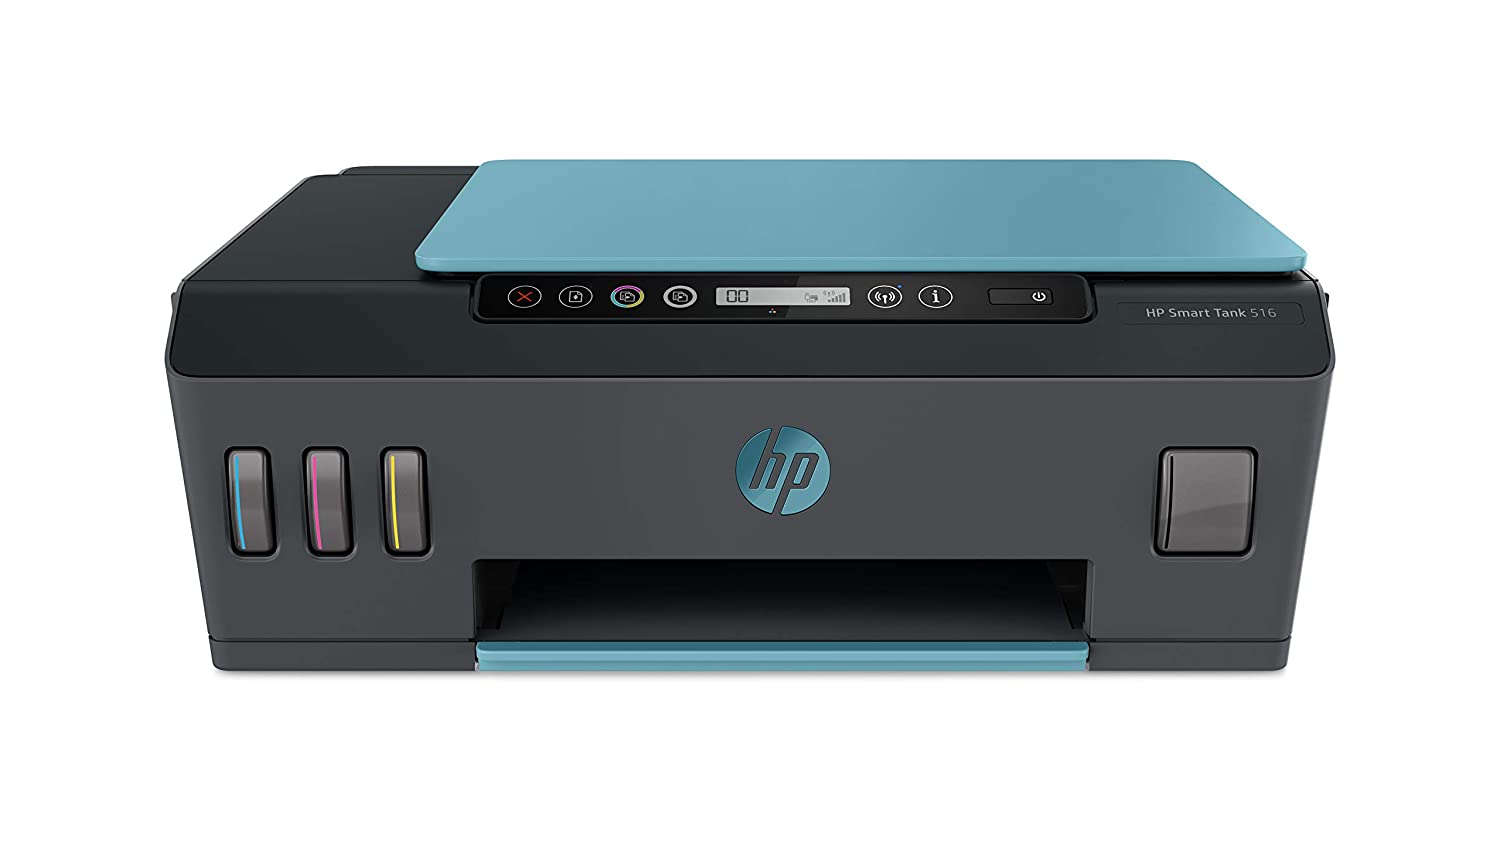 HP 516 Smart Tank All-in-one Wireless Colour Printer